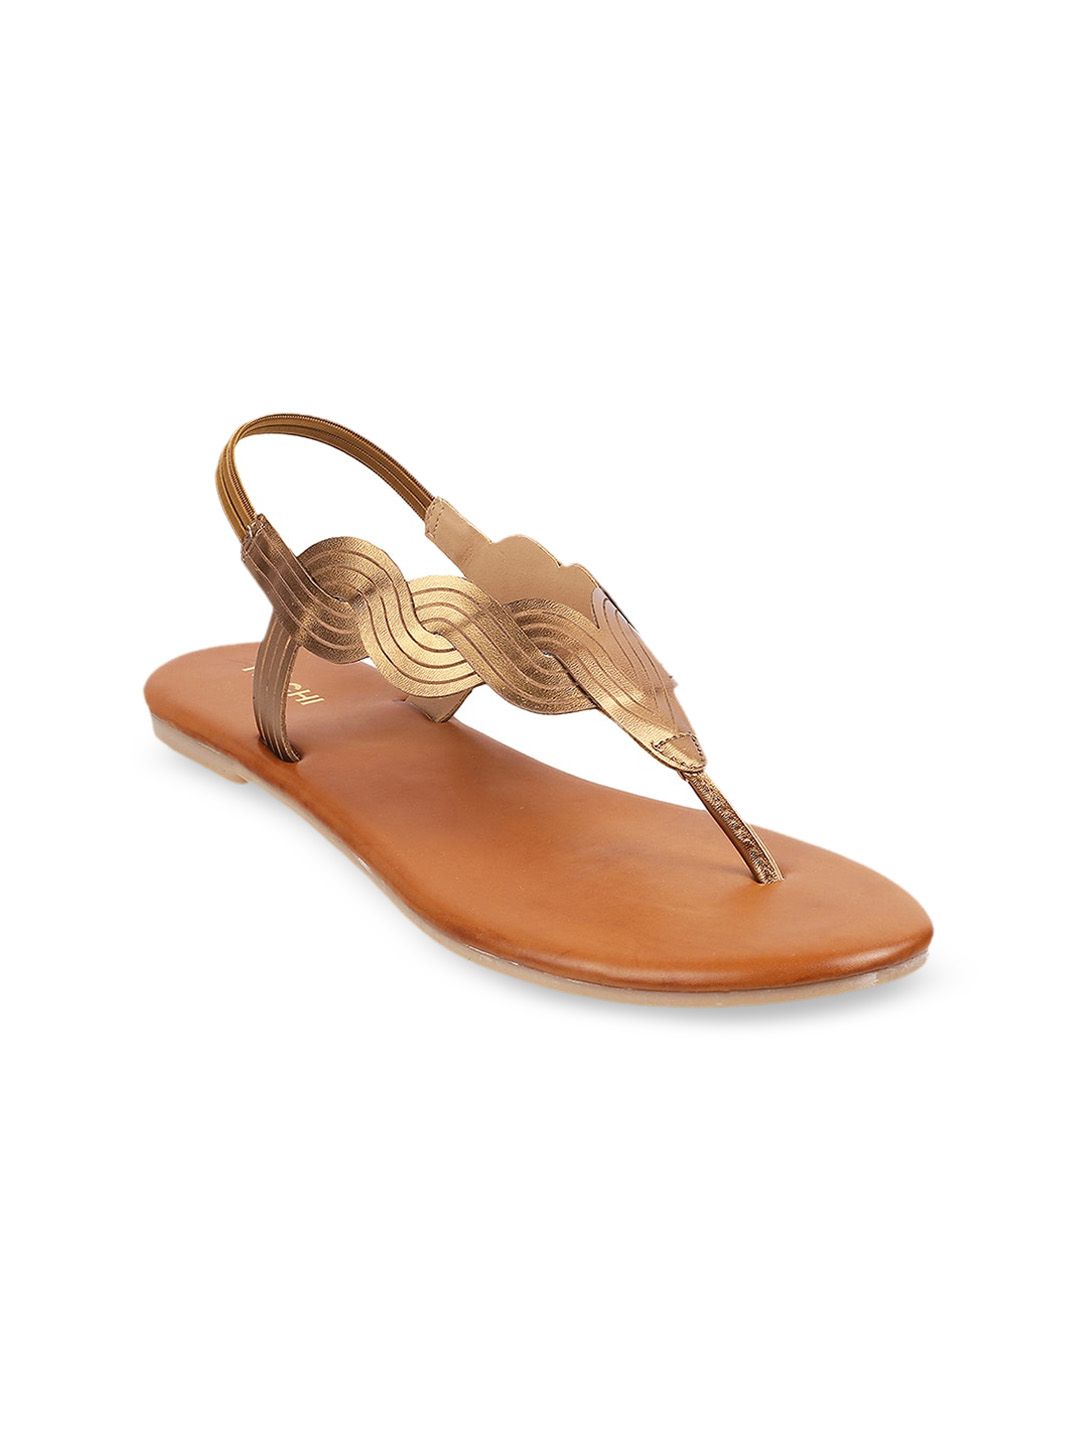 Mochi Women Gold-Toned T-Strap Flats Price in India